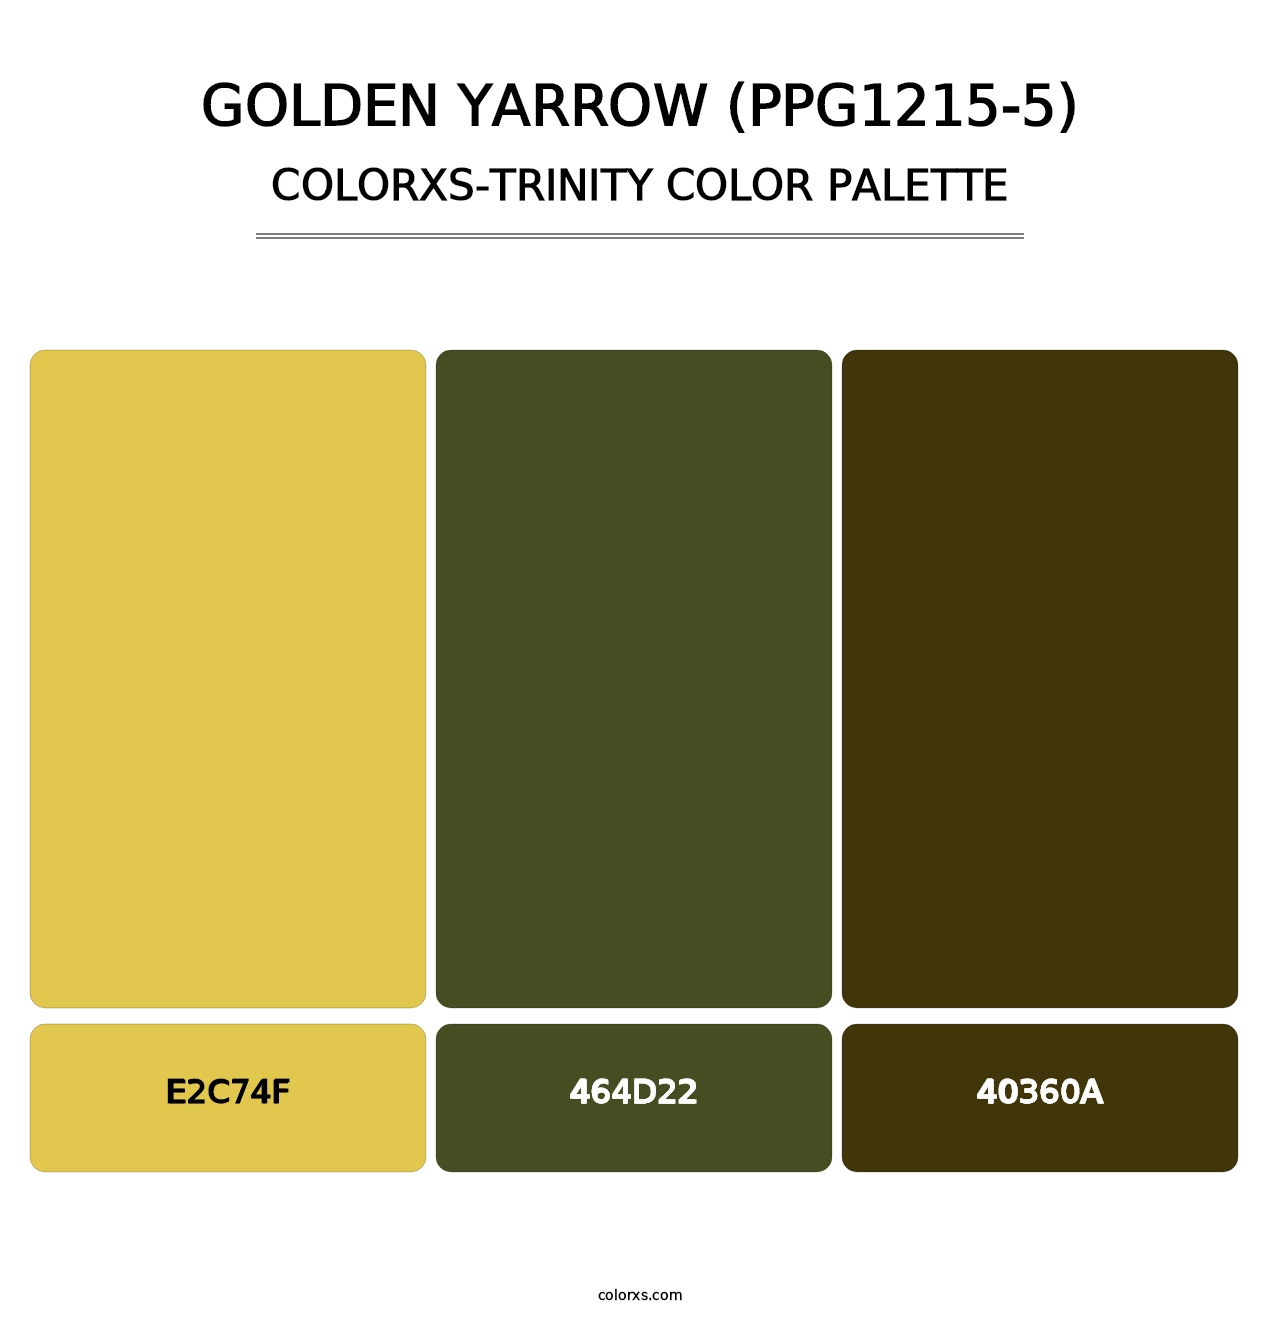 Golden Yarrow (PPG1215-5) - Colorxs Trinity Palette